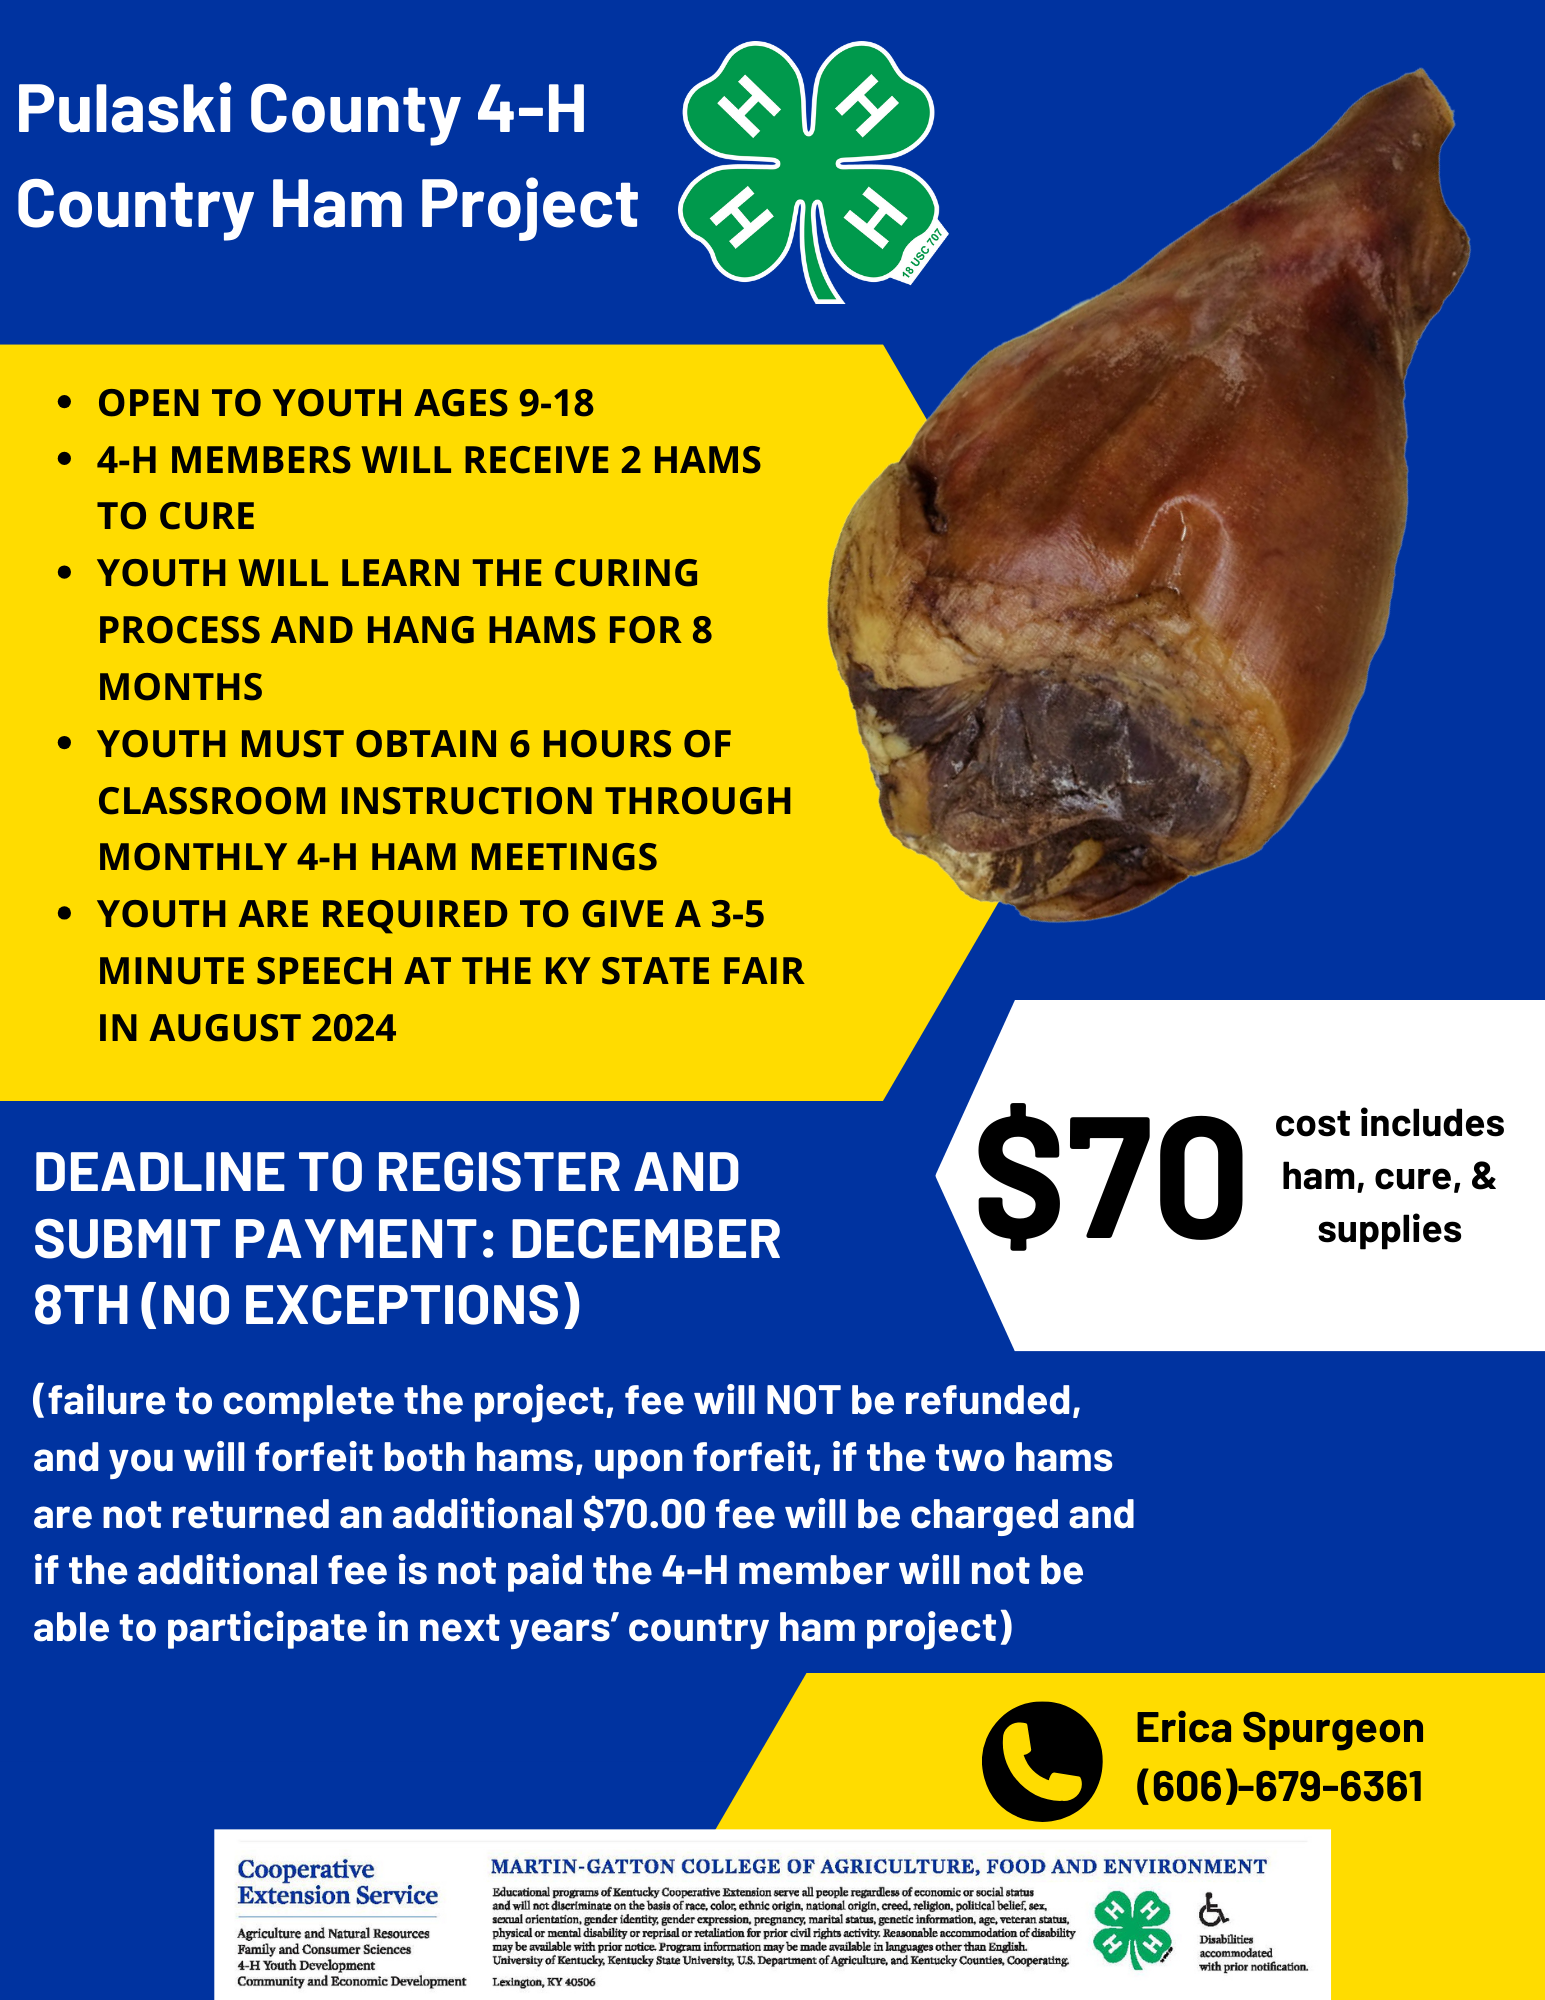 Project Flyer with a blue background. Image of a 4-H clover logo and a cured country ham. Text: Open to youth ages 9-18 4-H members will receive 2 hams to cure Youth will learn the curing process and hang hams for 8 months Youth must obtain 6 hours of classroom instruction through monthly 4-H Ham Meetings Youth are required to give a 3-5 minute speech at the KY State Fair in August 2024. DEADLINE TO REGISTER AND SUBMIT PAYMENT: December 8th (No exceptions).  $70 cost includes ham, cure, & supplies. failure to complete the project, fee will NOT be refunded, and you will forfeit both hams, upon forfeit, if the two hams are not returned an additional $70.00 fee will be charged and if the additional fee is not paid the 4-H member will not be able to participate in next years’ country ham project). Call Erica Spurgeon (606)-679-6361.  